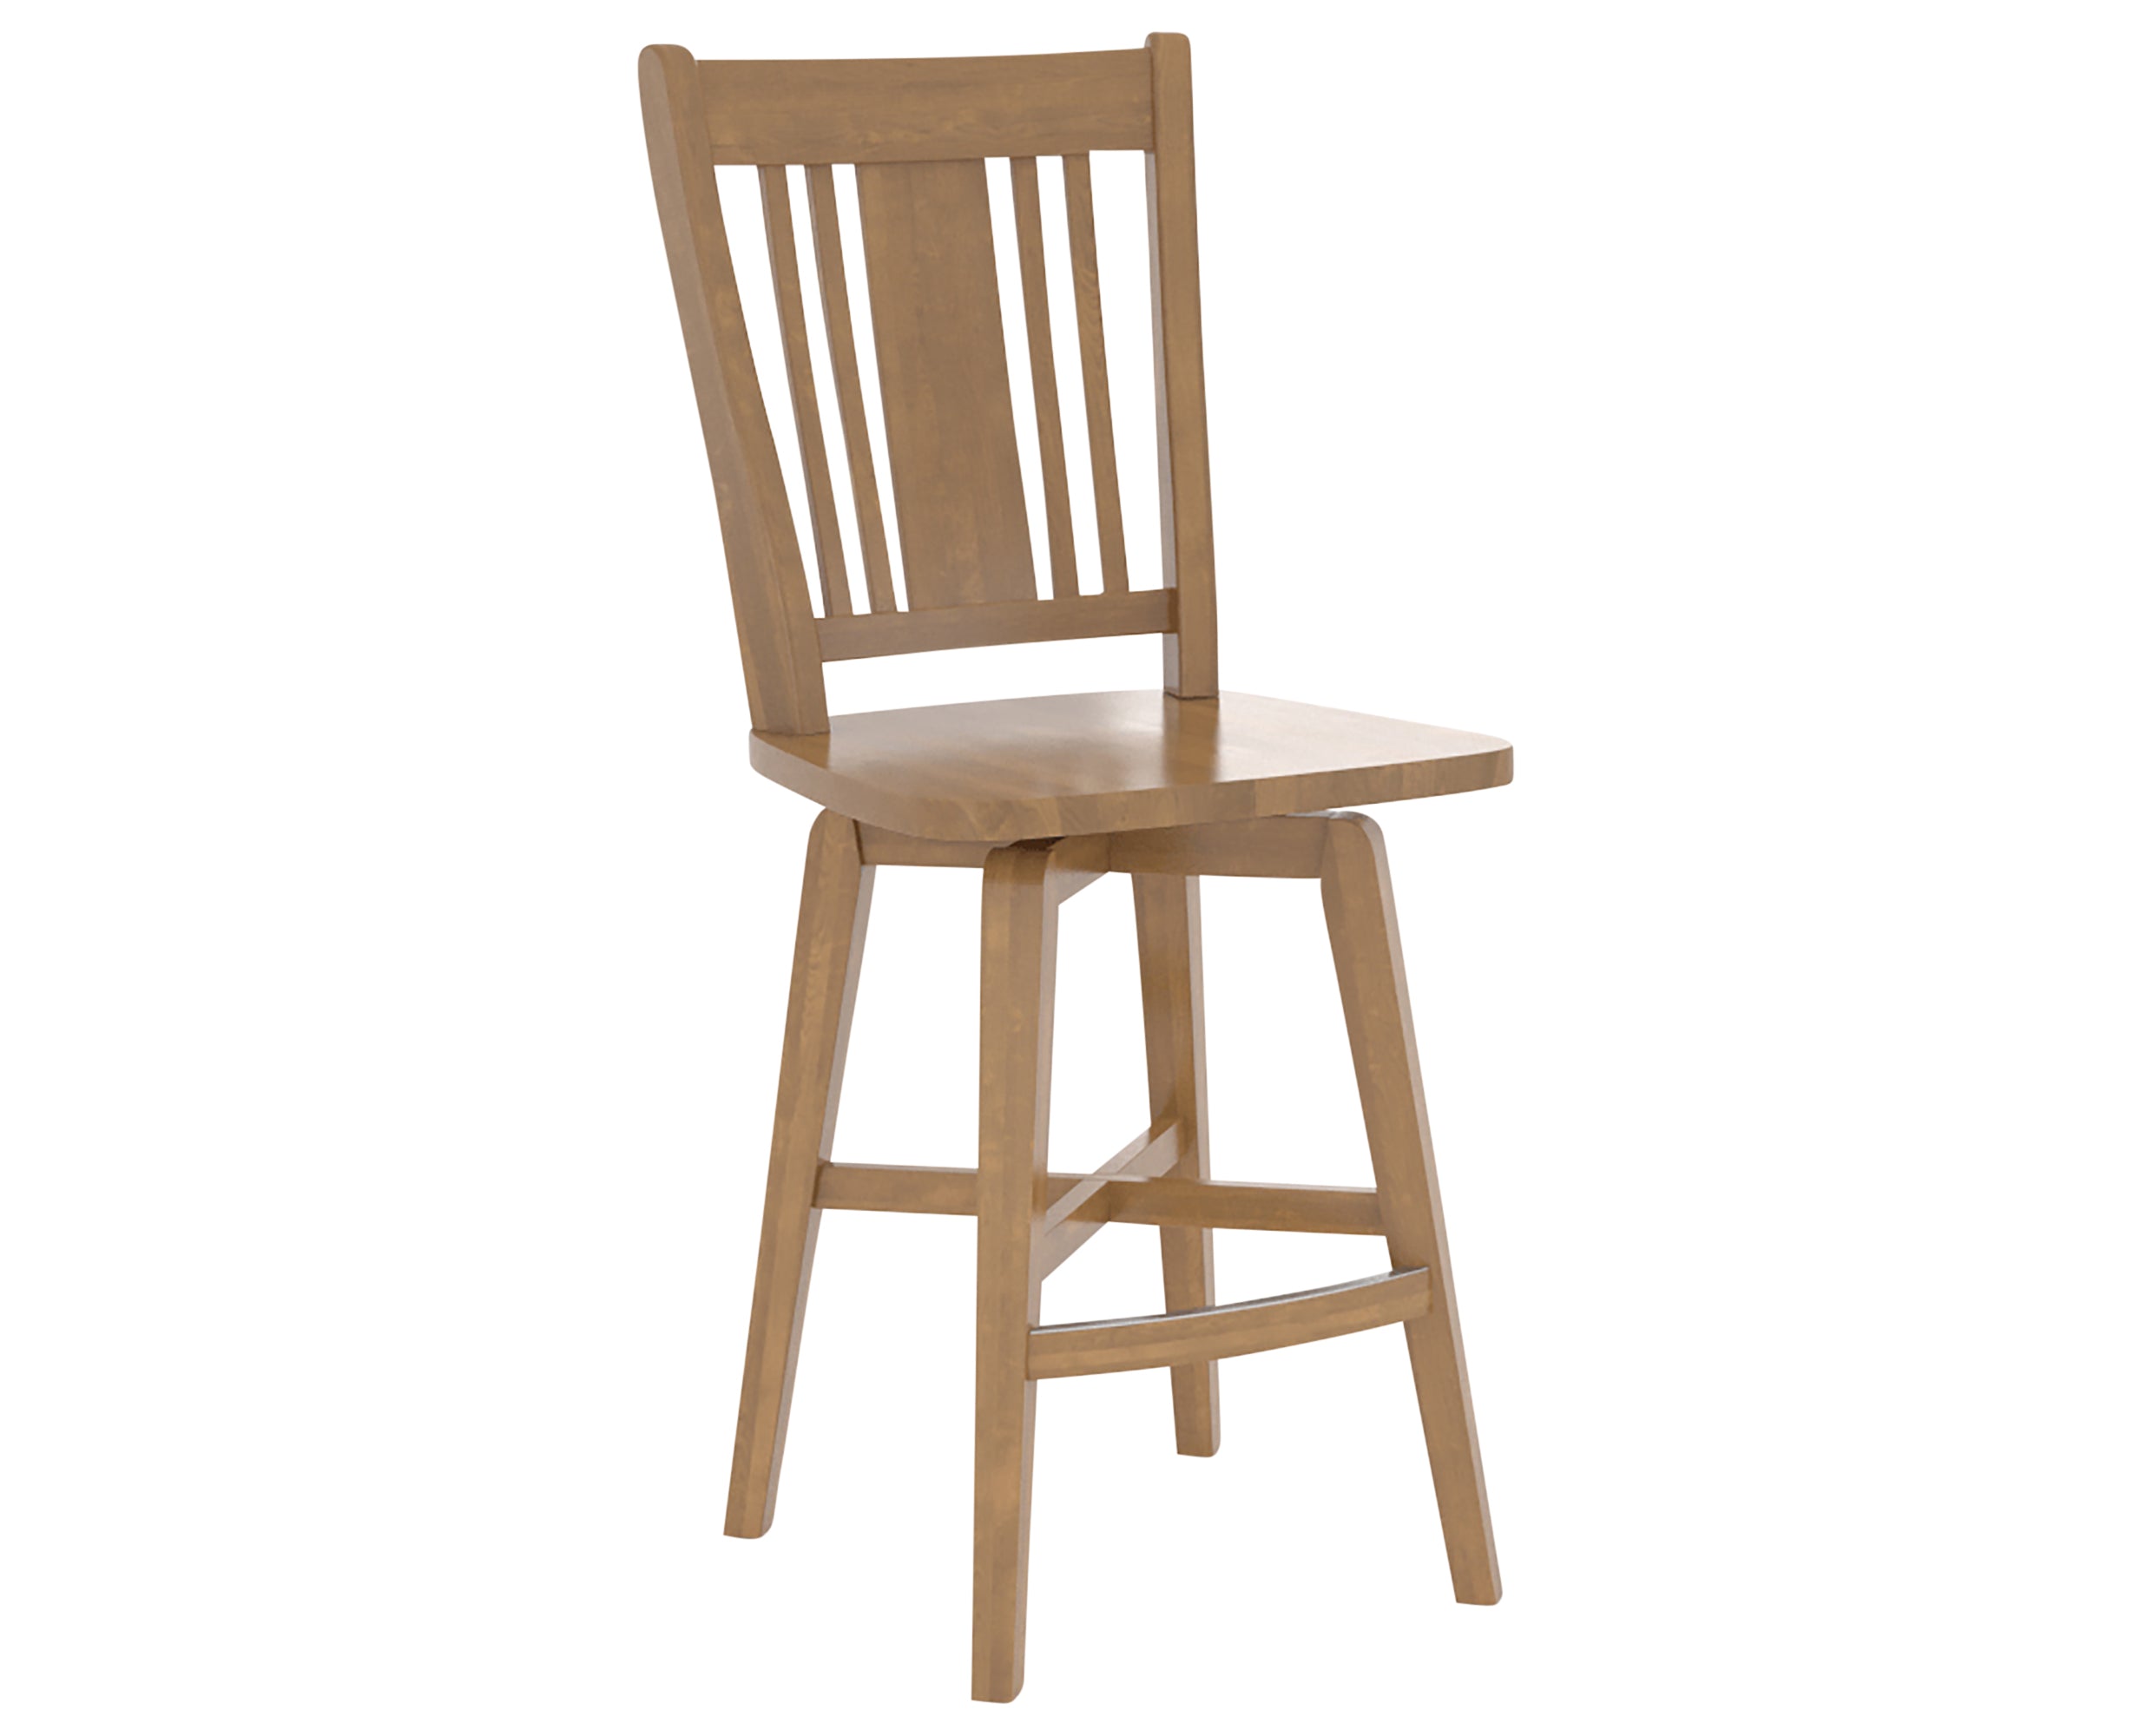 Honey Washed | Canadel Core Counter Stool 7250 | Valley Ridge Furniture